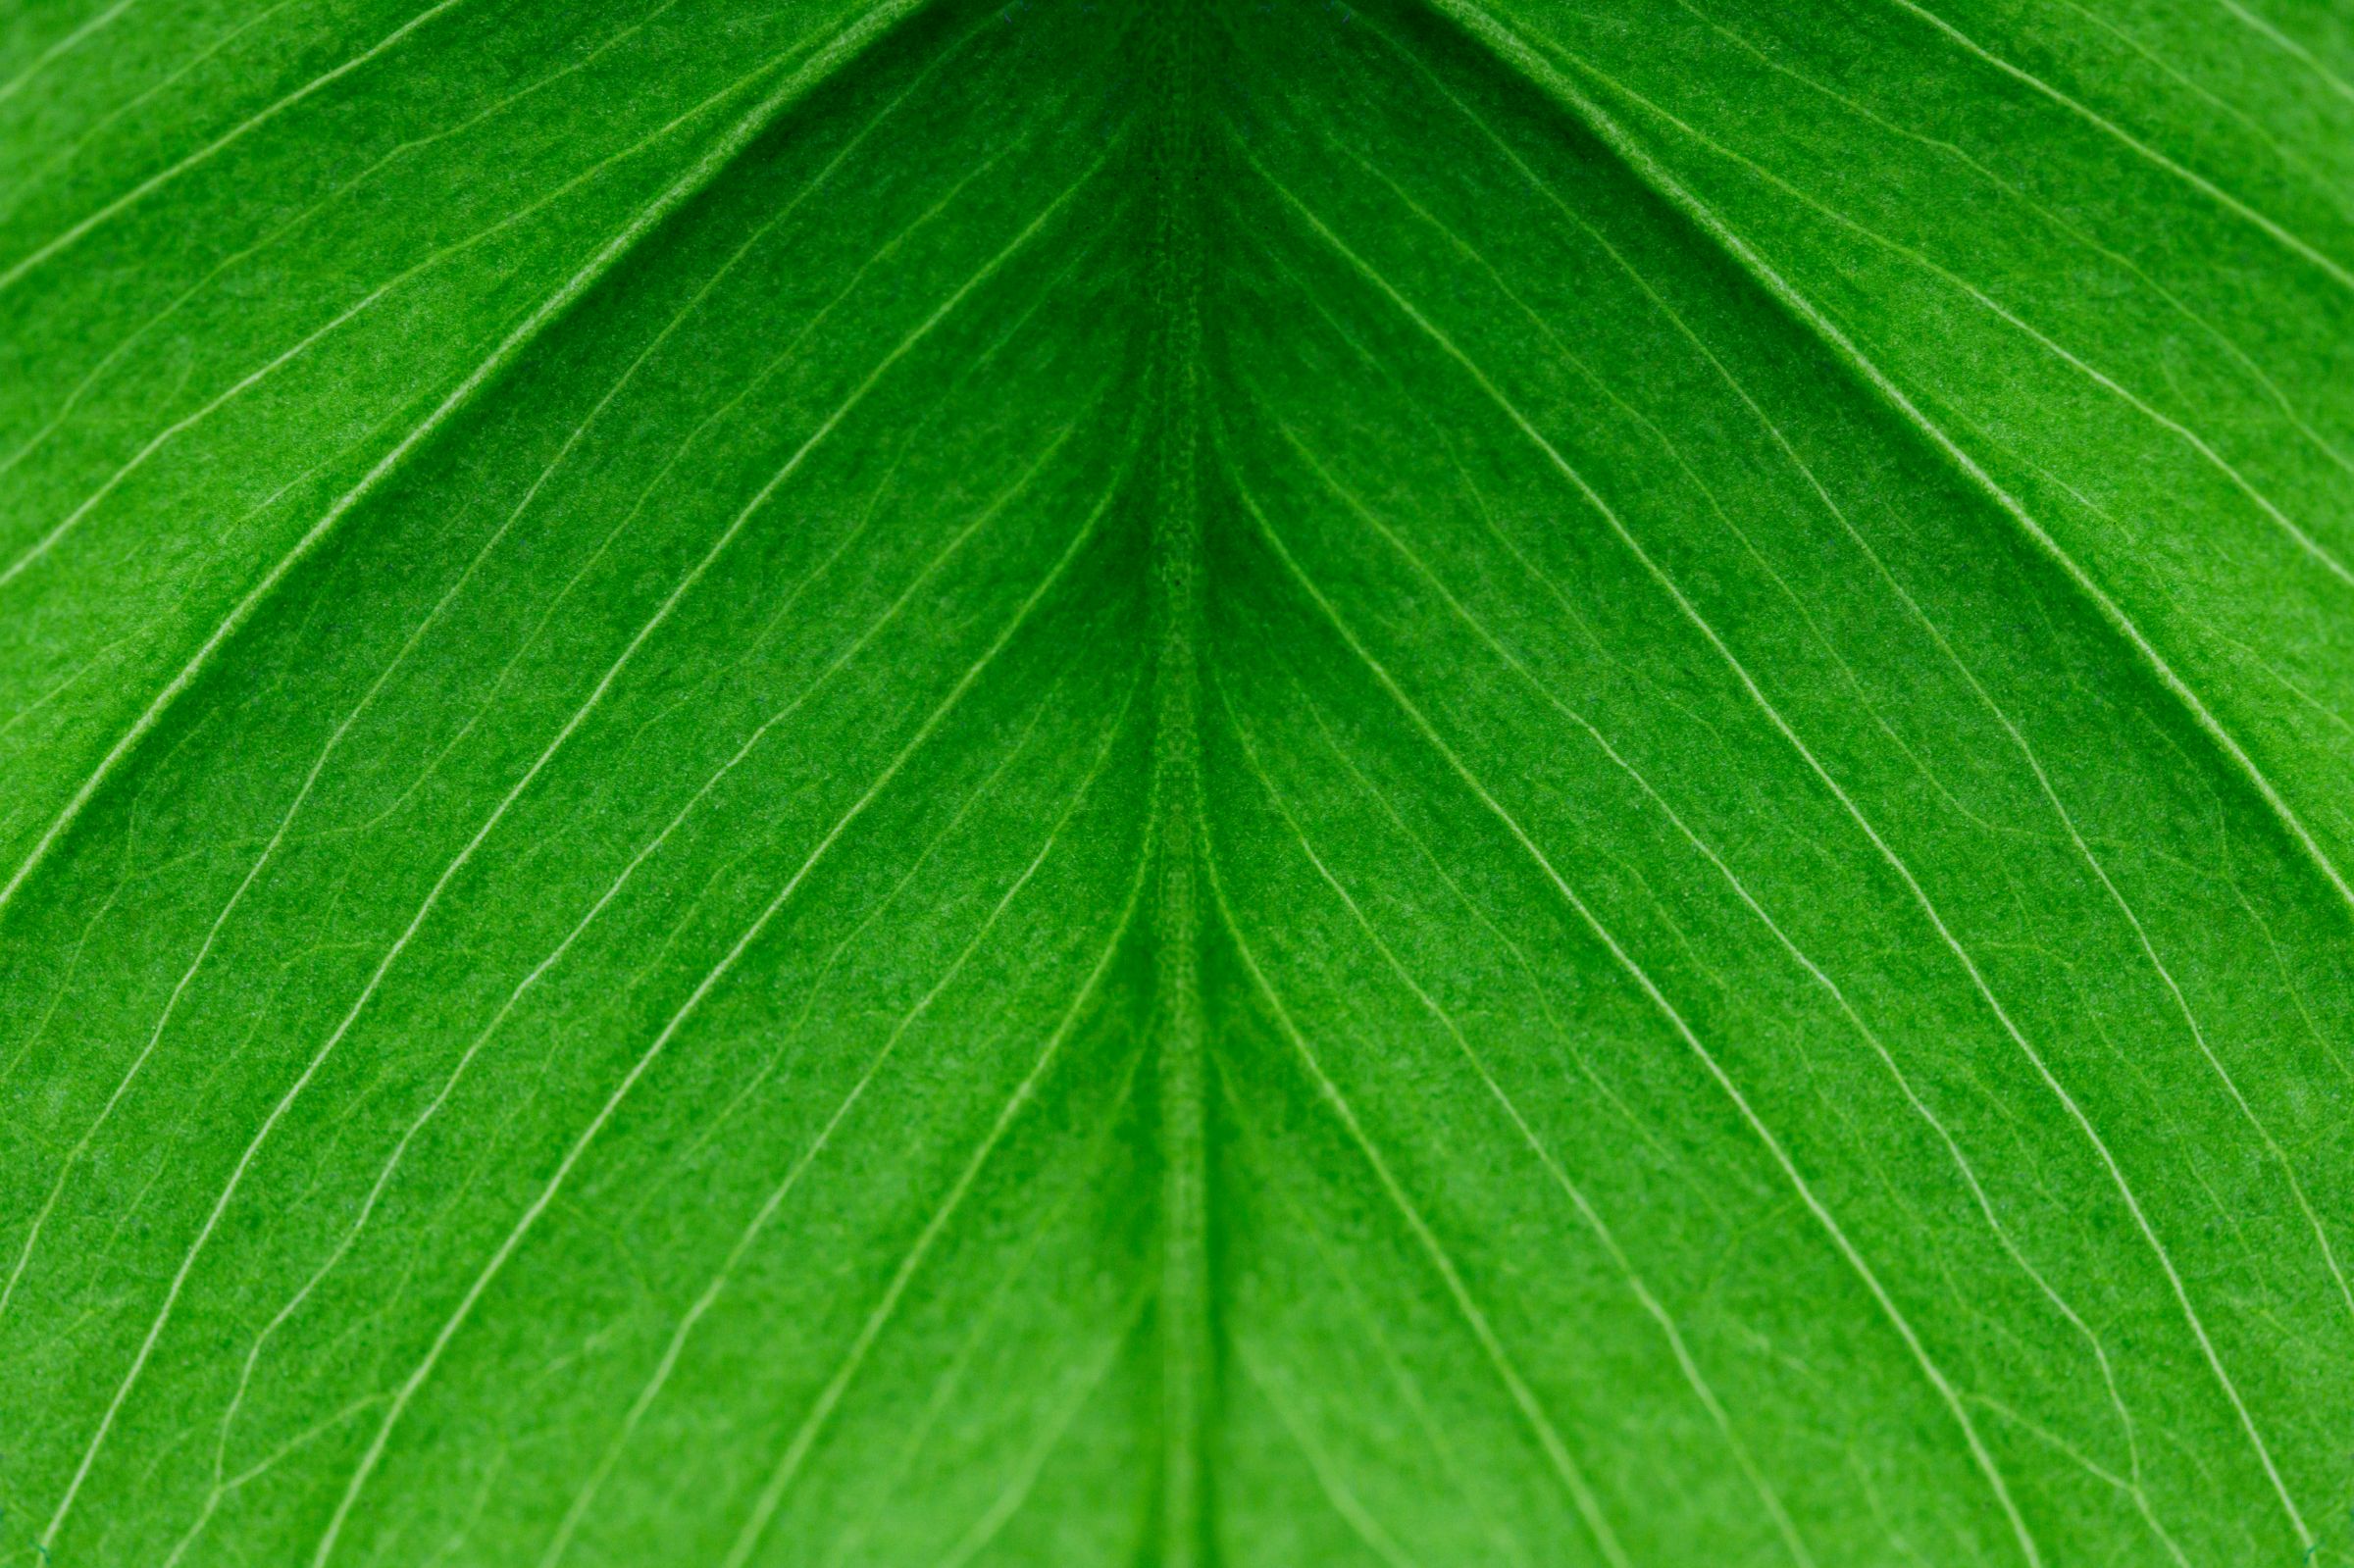 Monstera Leaf Close Up Image Beautiful Green Indoor Plant